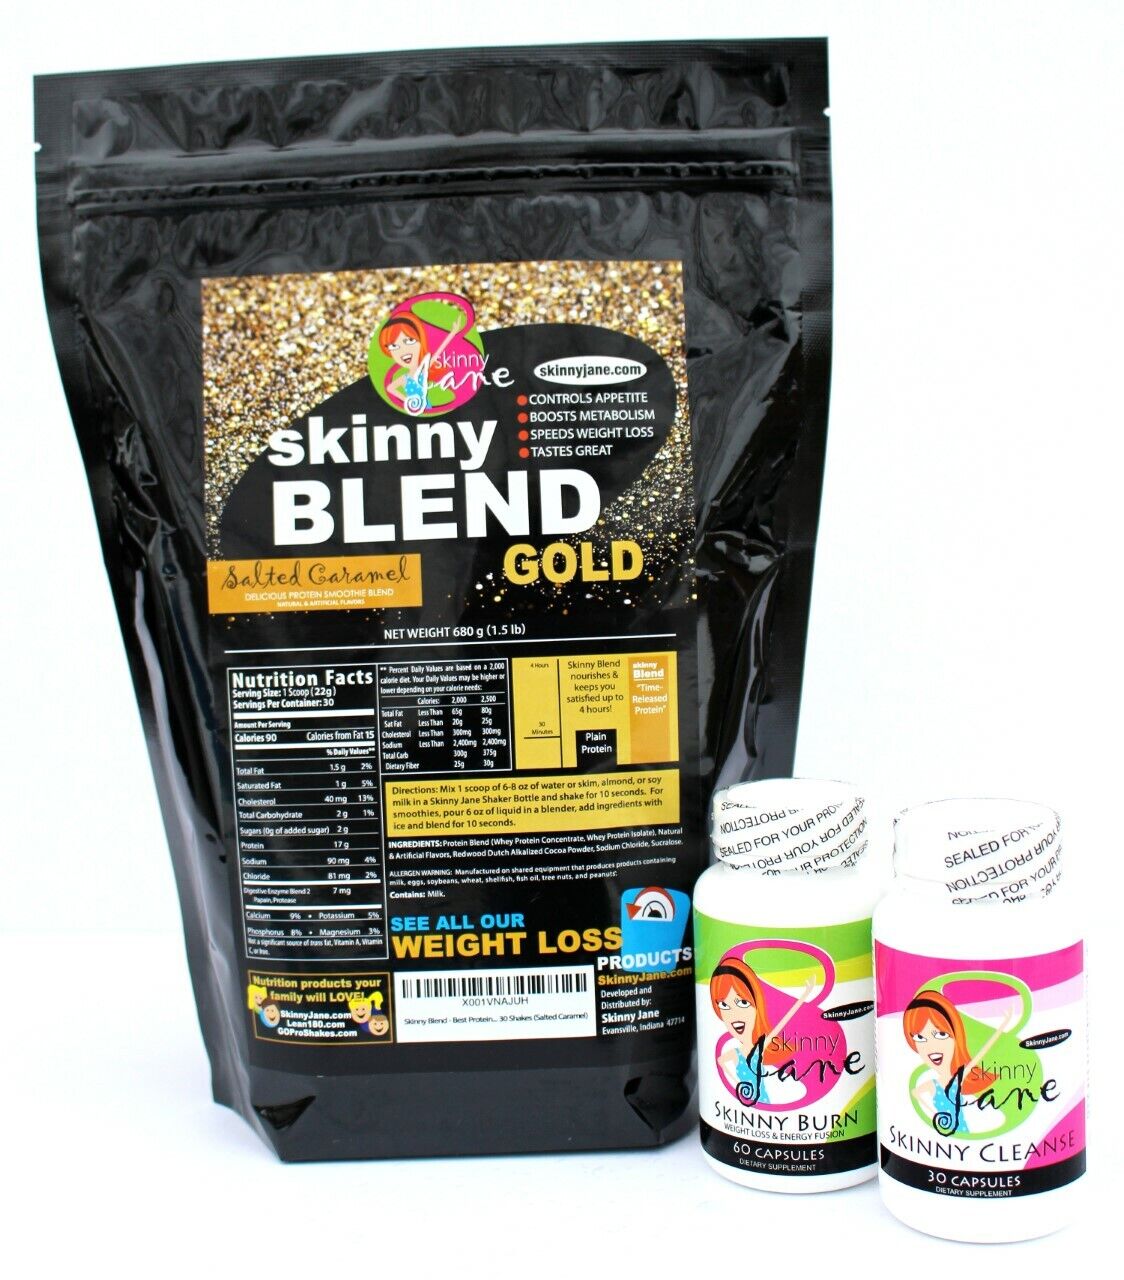 Skinny Jane, Weight Loss Quick Slim Kit, Skinny Blend Gold and Diet Supplements